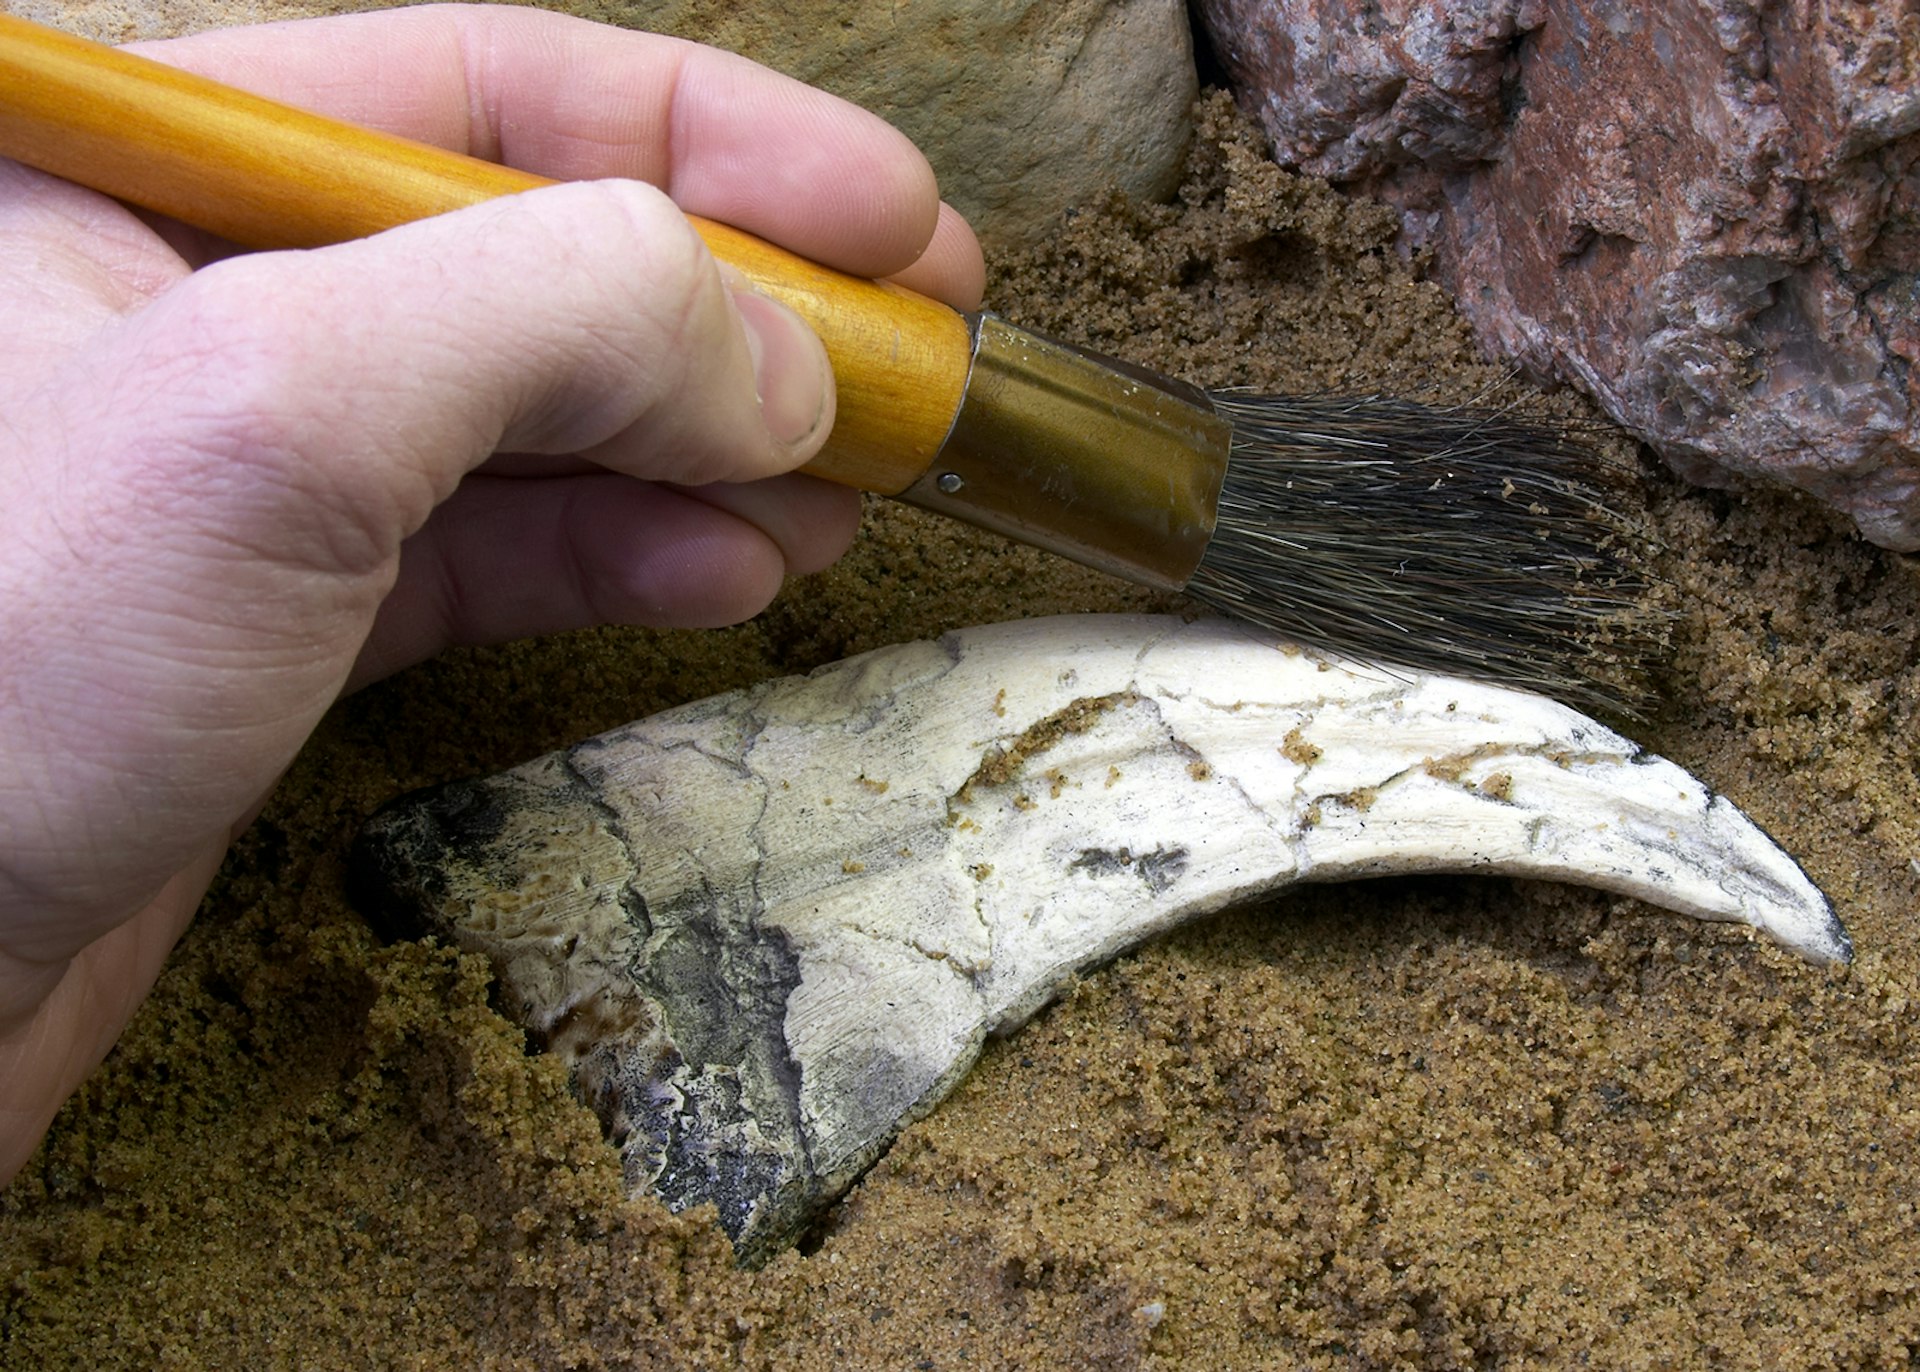 Brushing sand away from a fossil dinosaur claw © tacojim / Getty Images